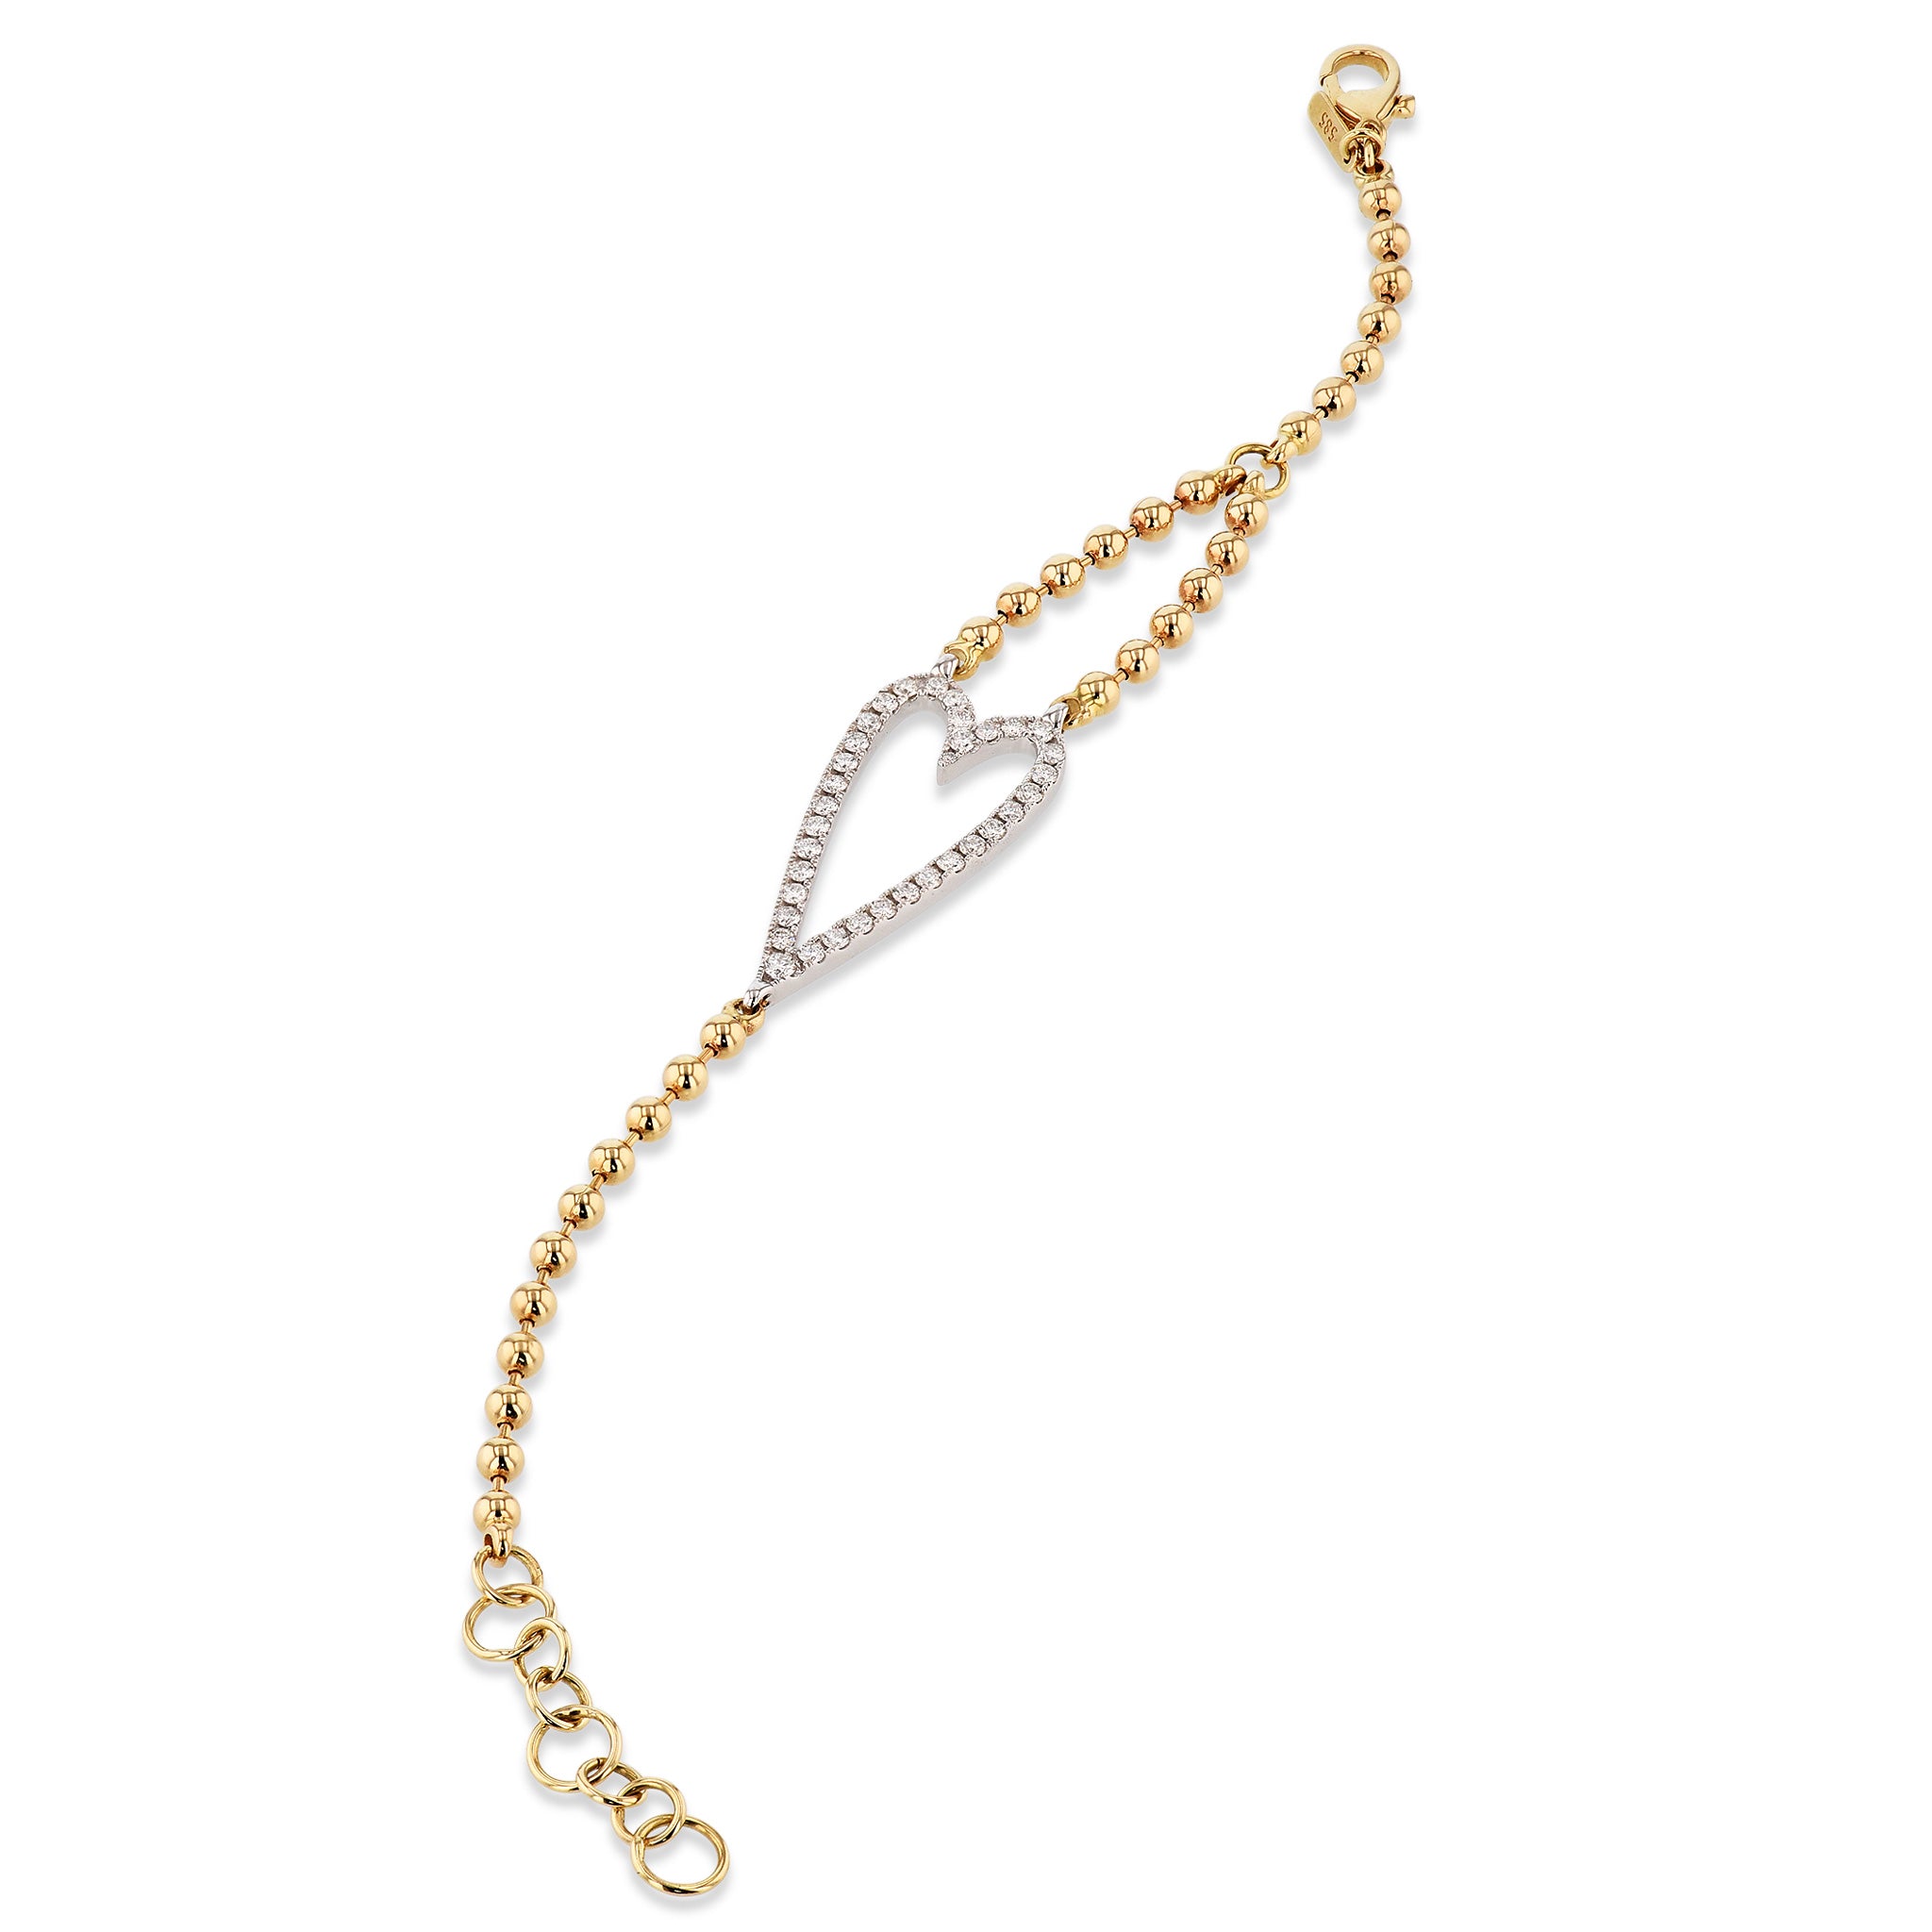 Open Heart Charm Yellow Gold Diamond Pave Bracelet Bracelets Curated by H